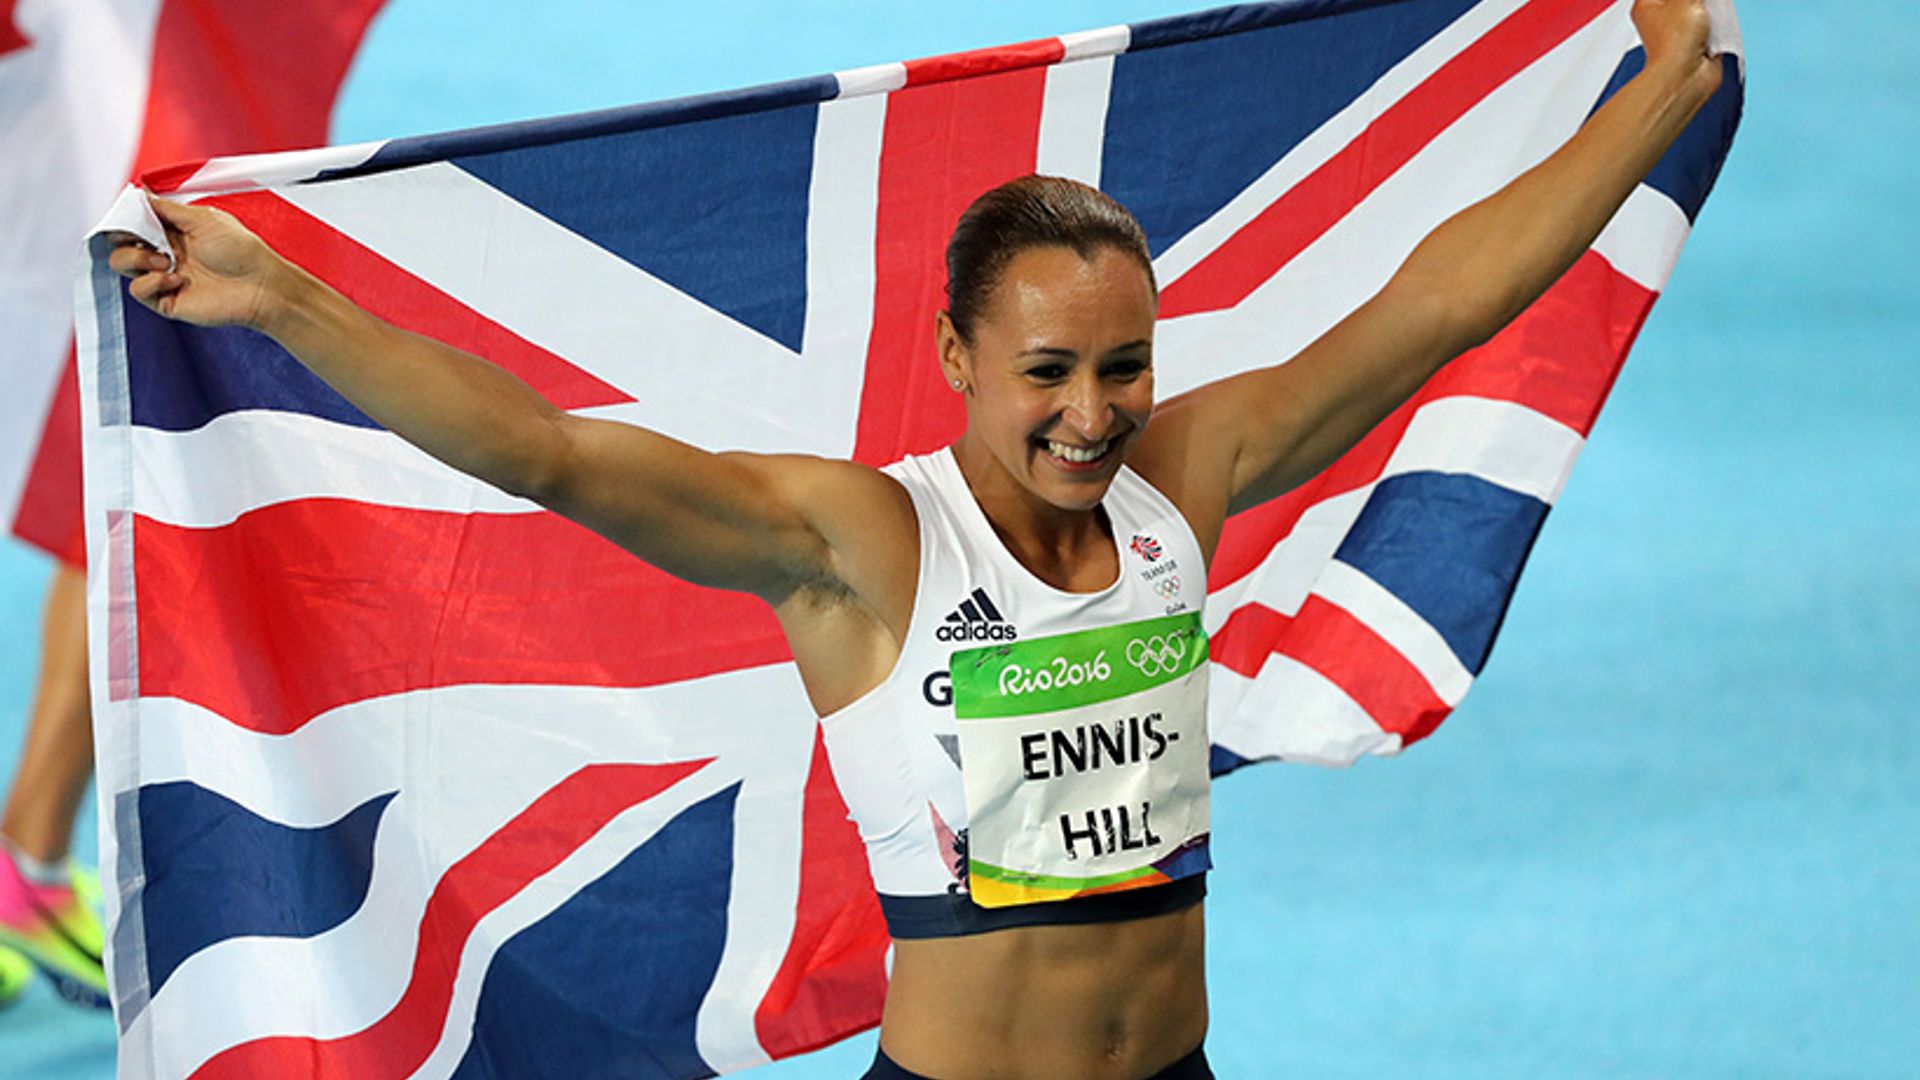 Jessica Ennis-Hill retires from athletics: 'I want to leave my sport on a high'